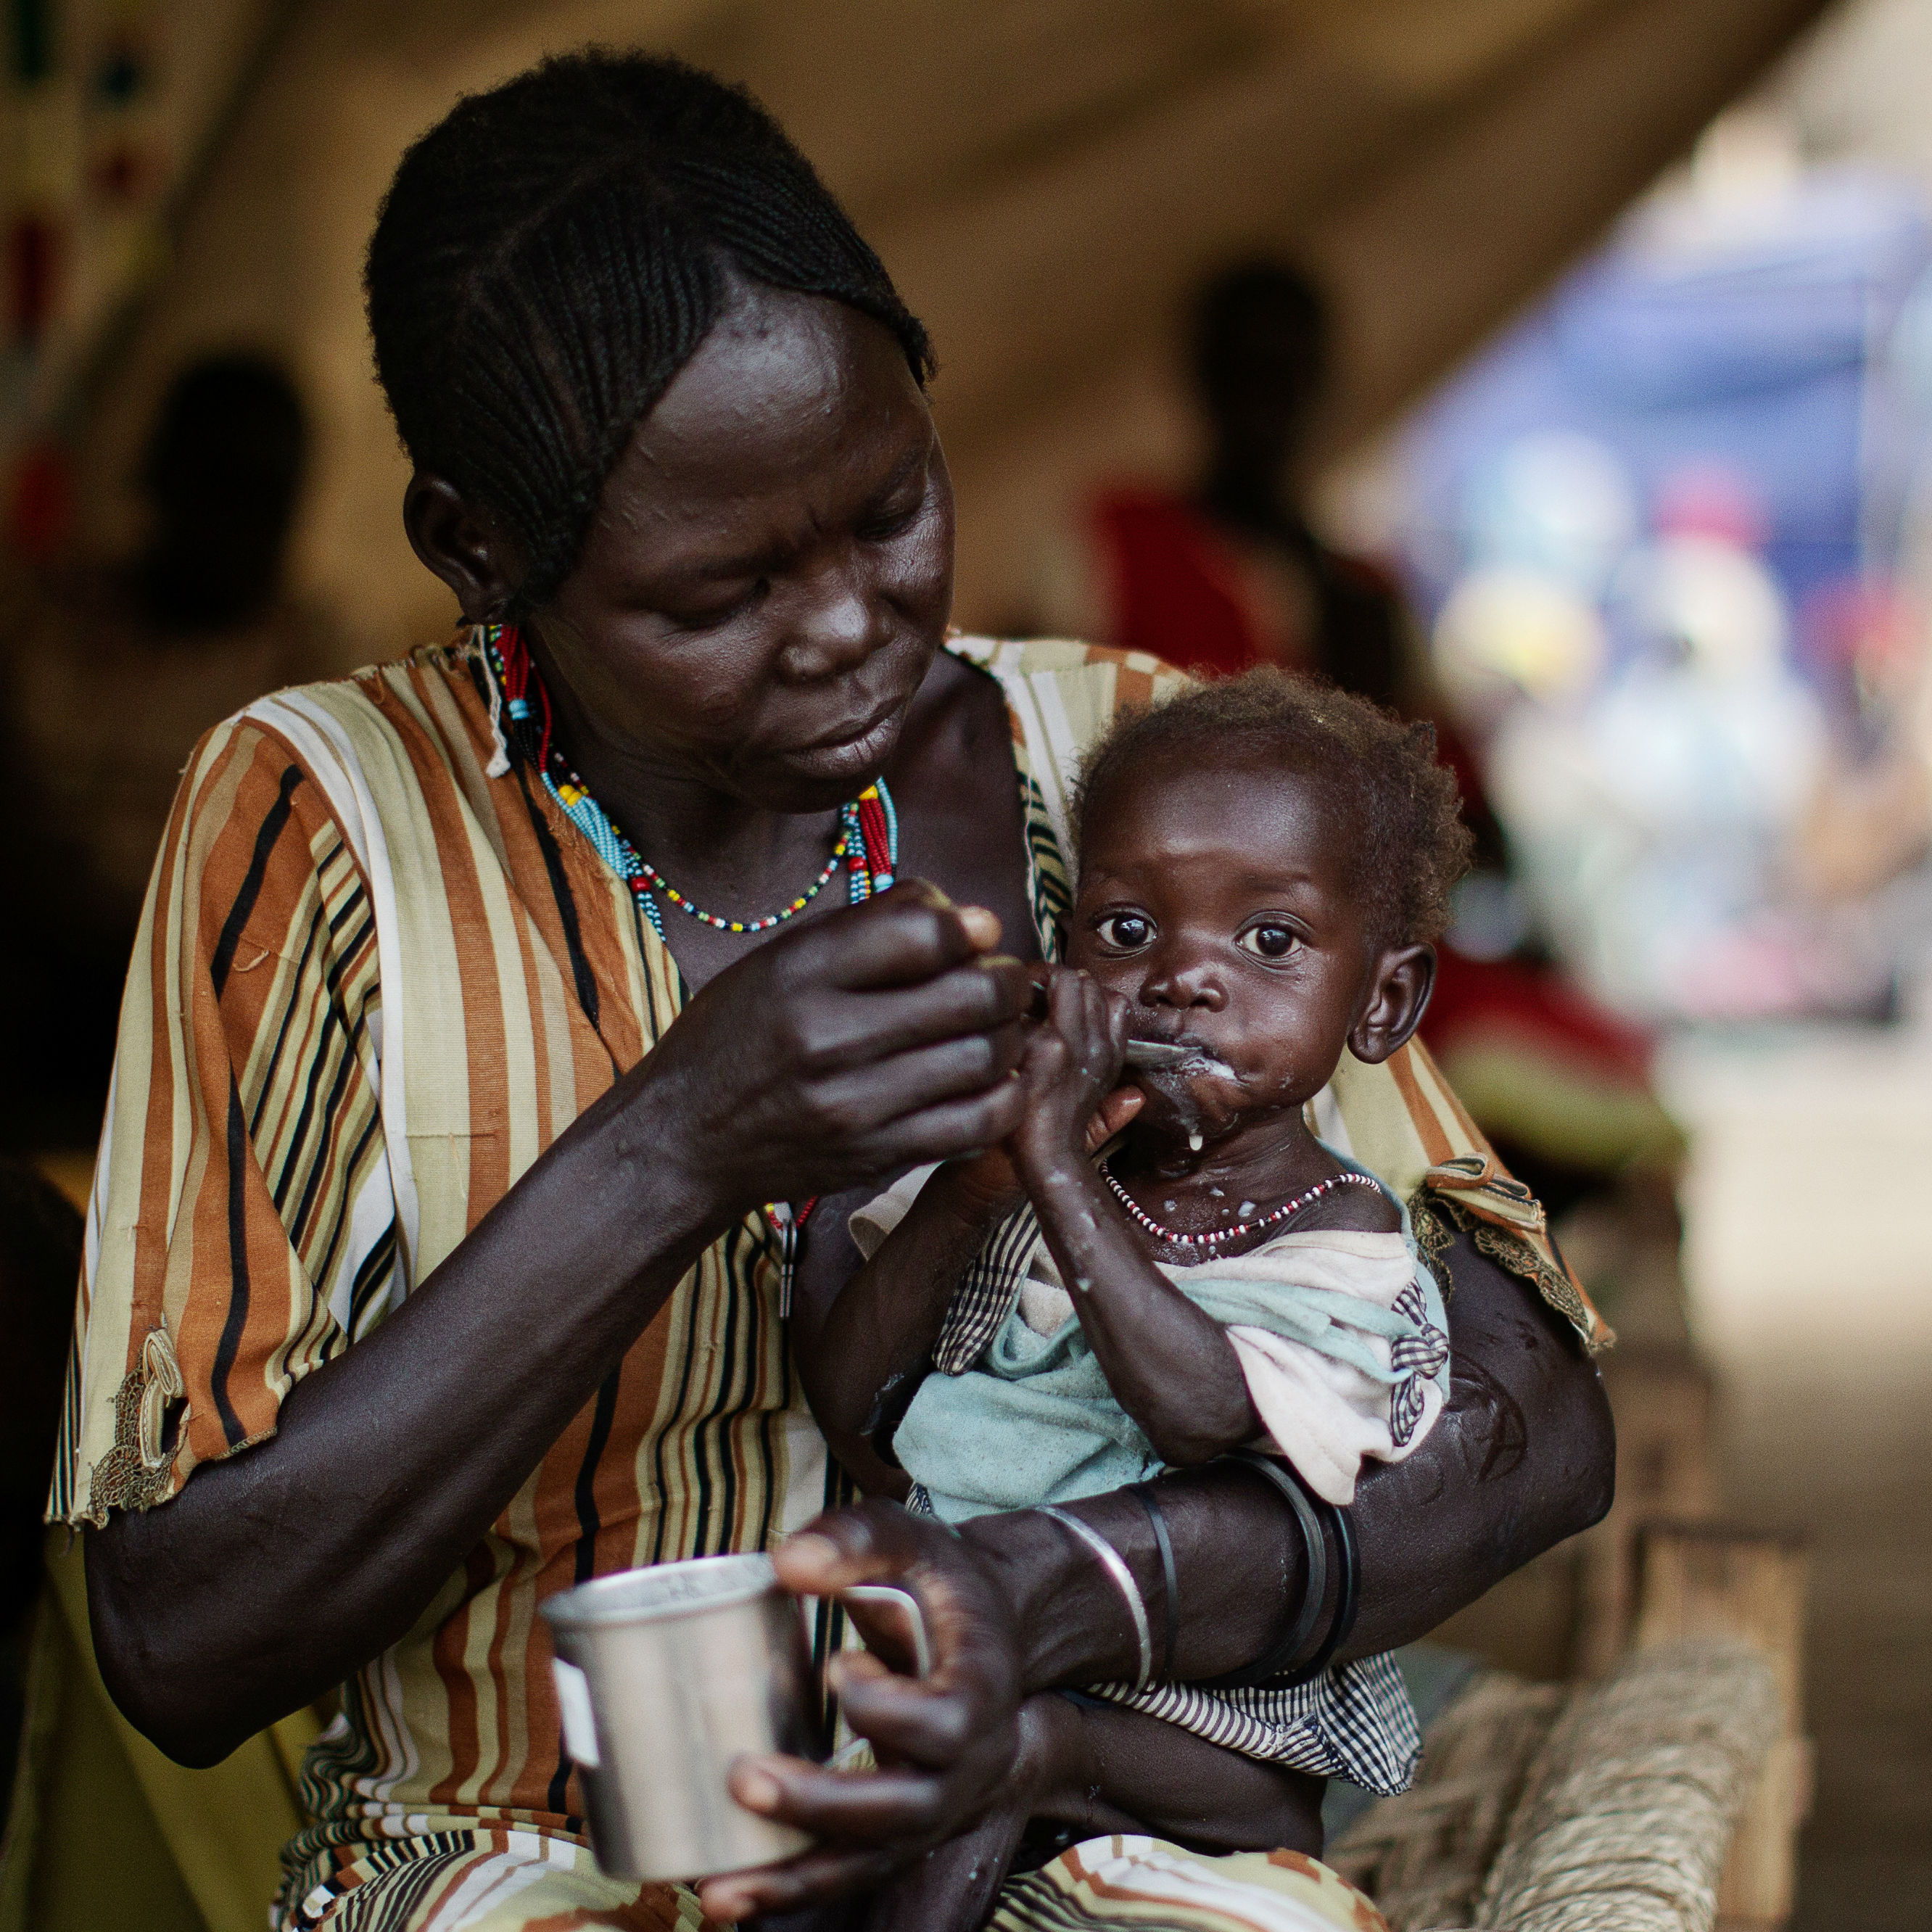 'Our people are struggling simply to survive', warn South Sudan's bishops, as UN declares famine in parts of country